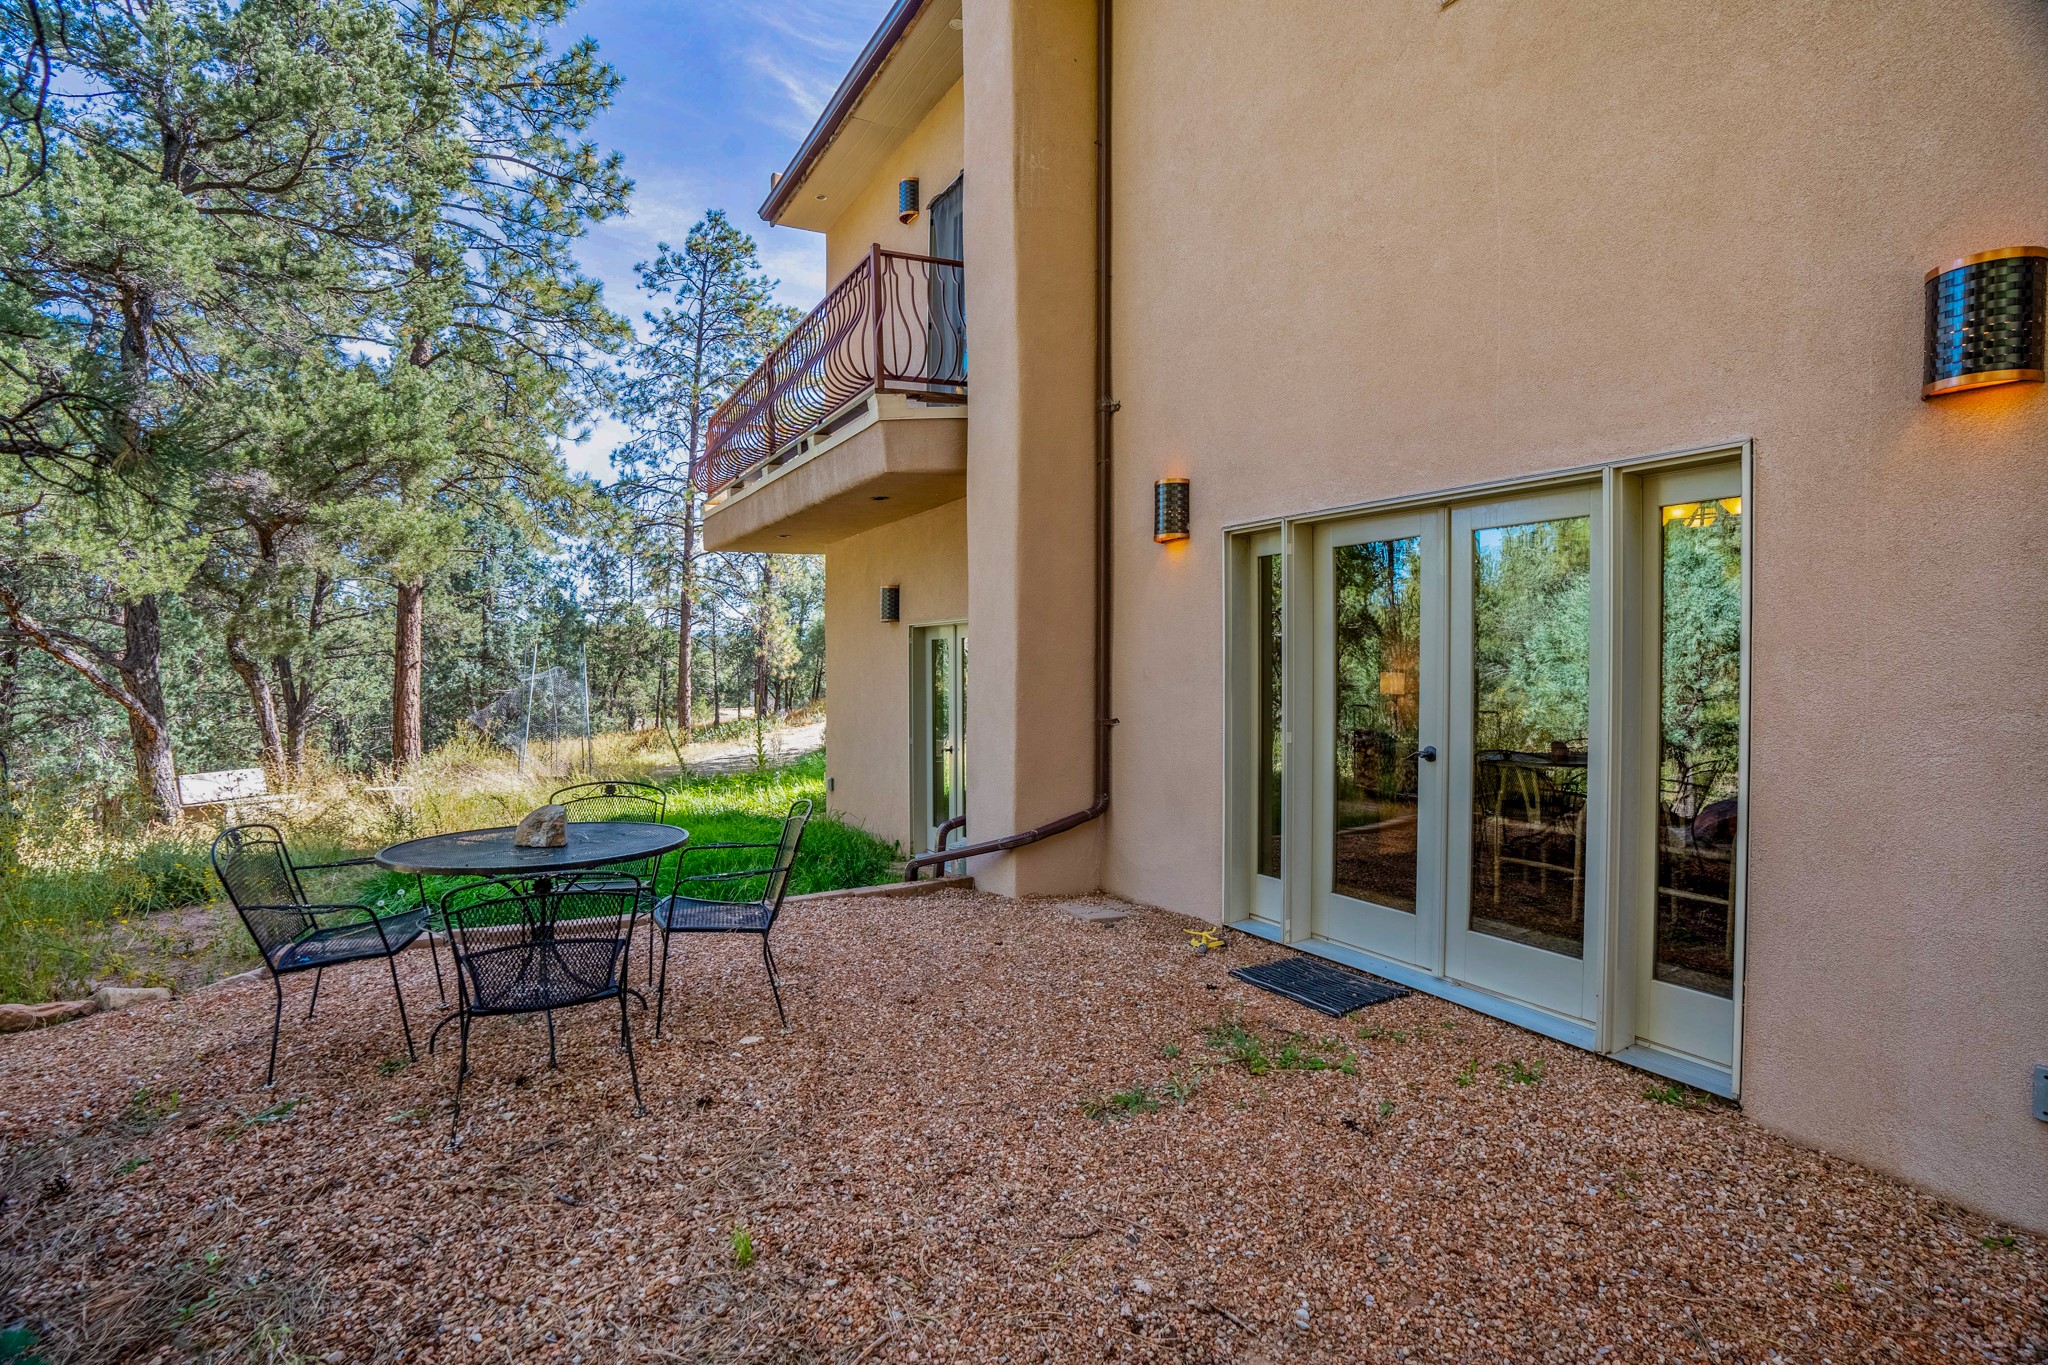 21 A Pine Haven, Glorieta, New Mexico 87535, 3 Bedrooms Bedrooms, ,3 BathroomsBathrooms,Residential,For Sale,21 A Pine Haven,202233115